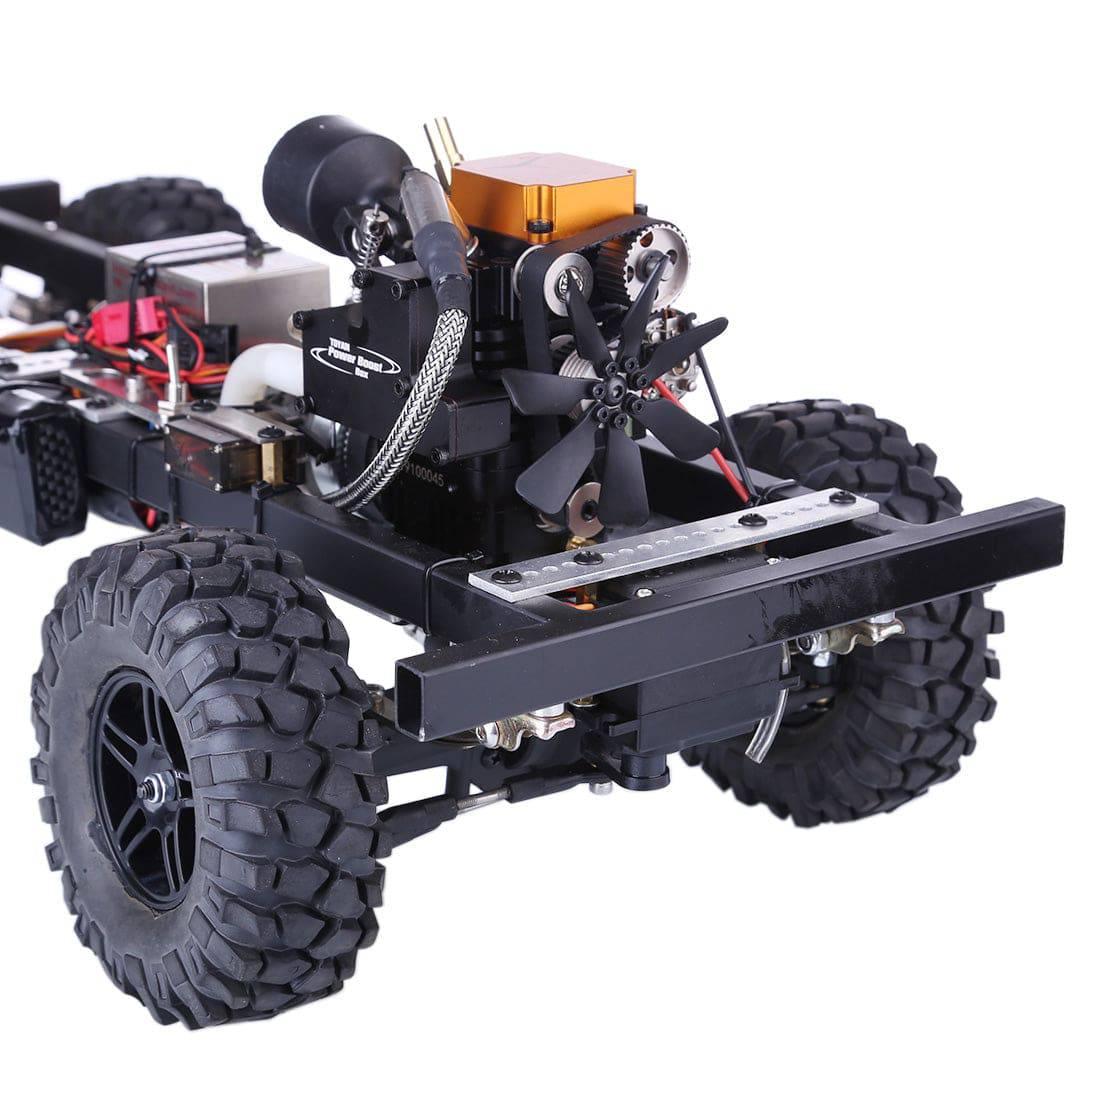 Remote Control Car Petrol Engine: Top Modifications for Incredible Performance in Remote Control Petrol Engines